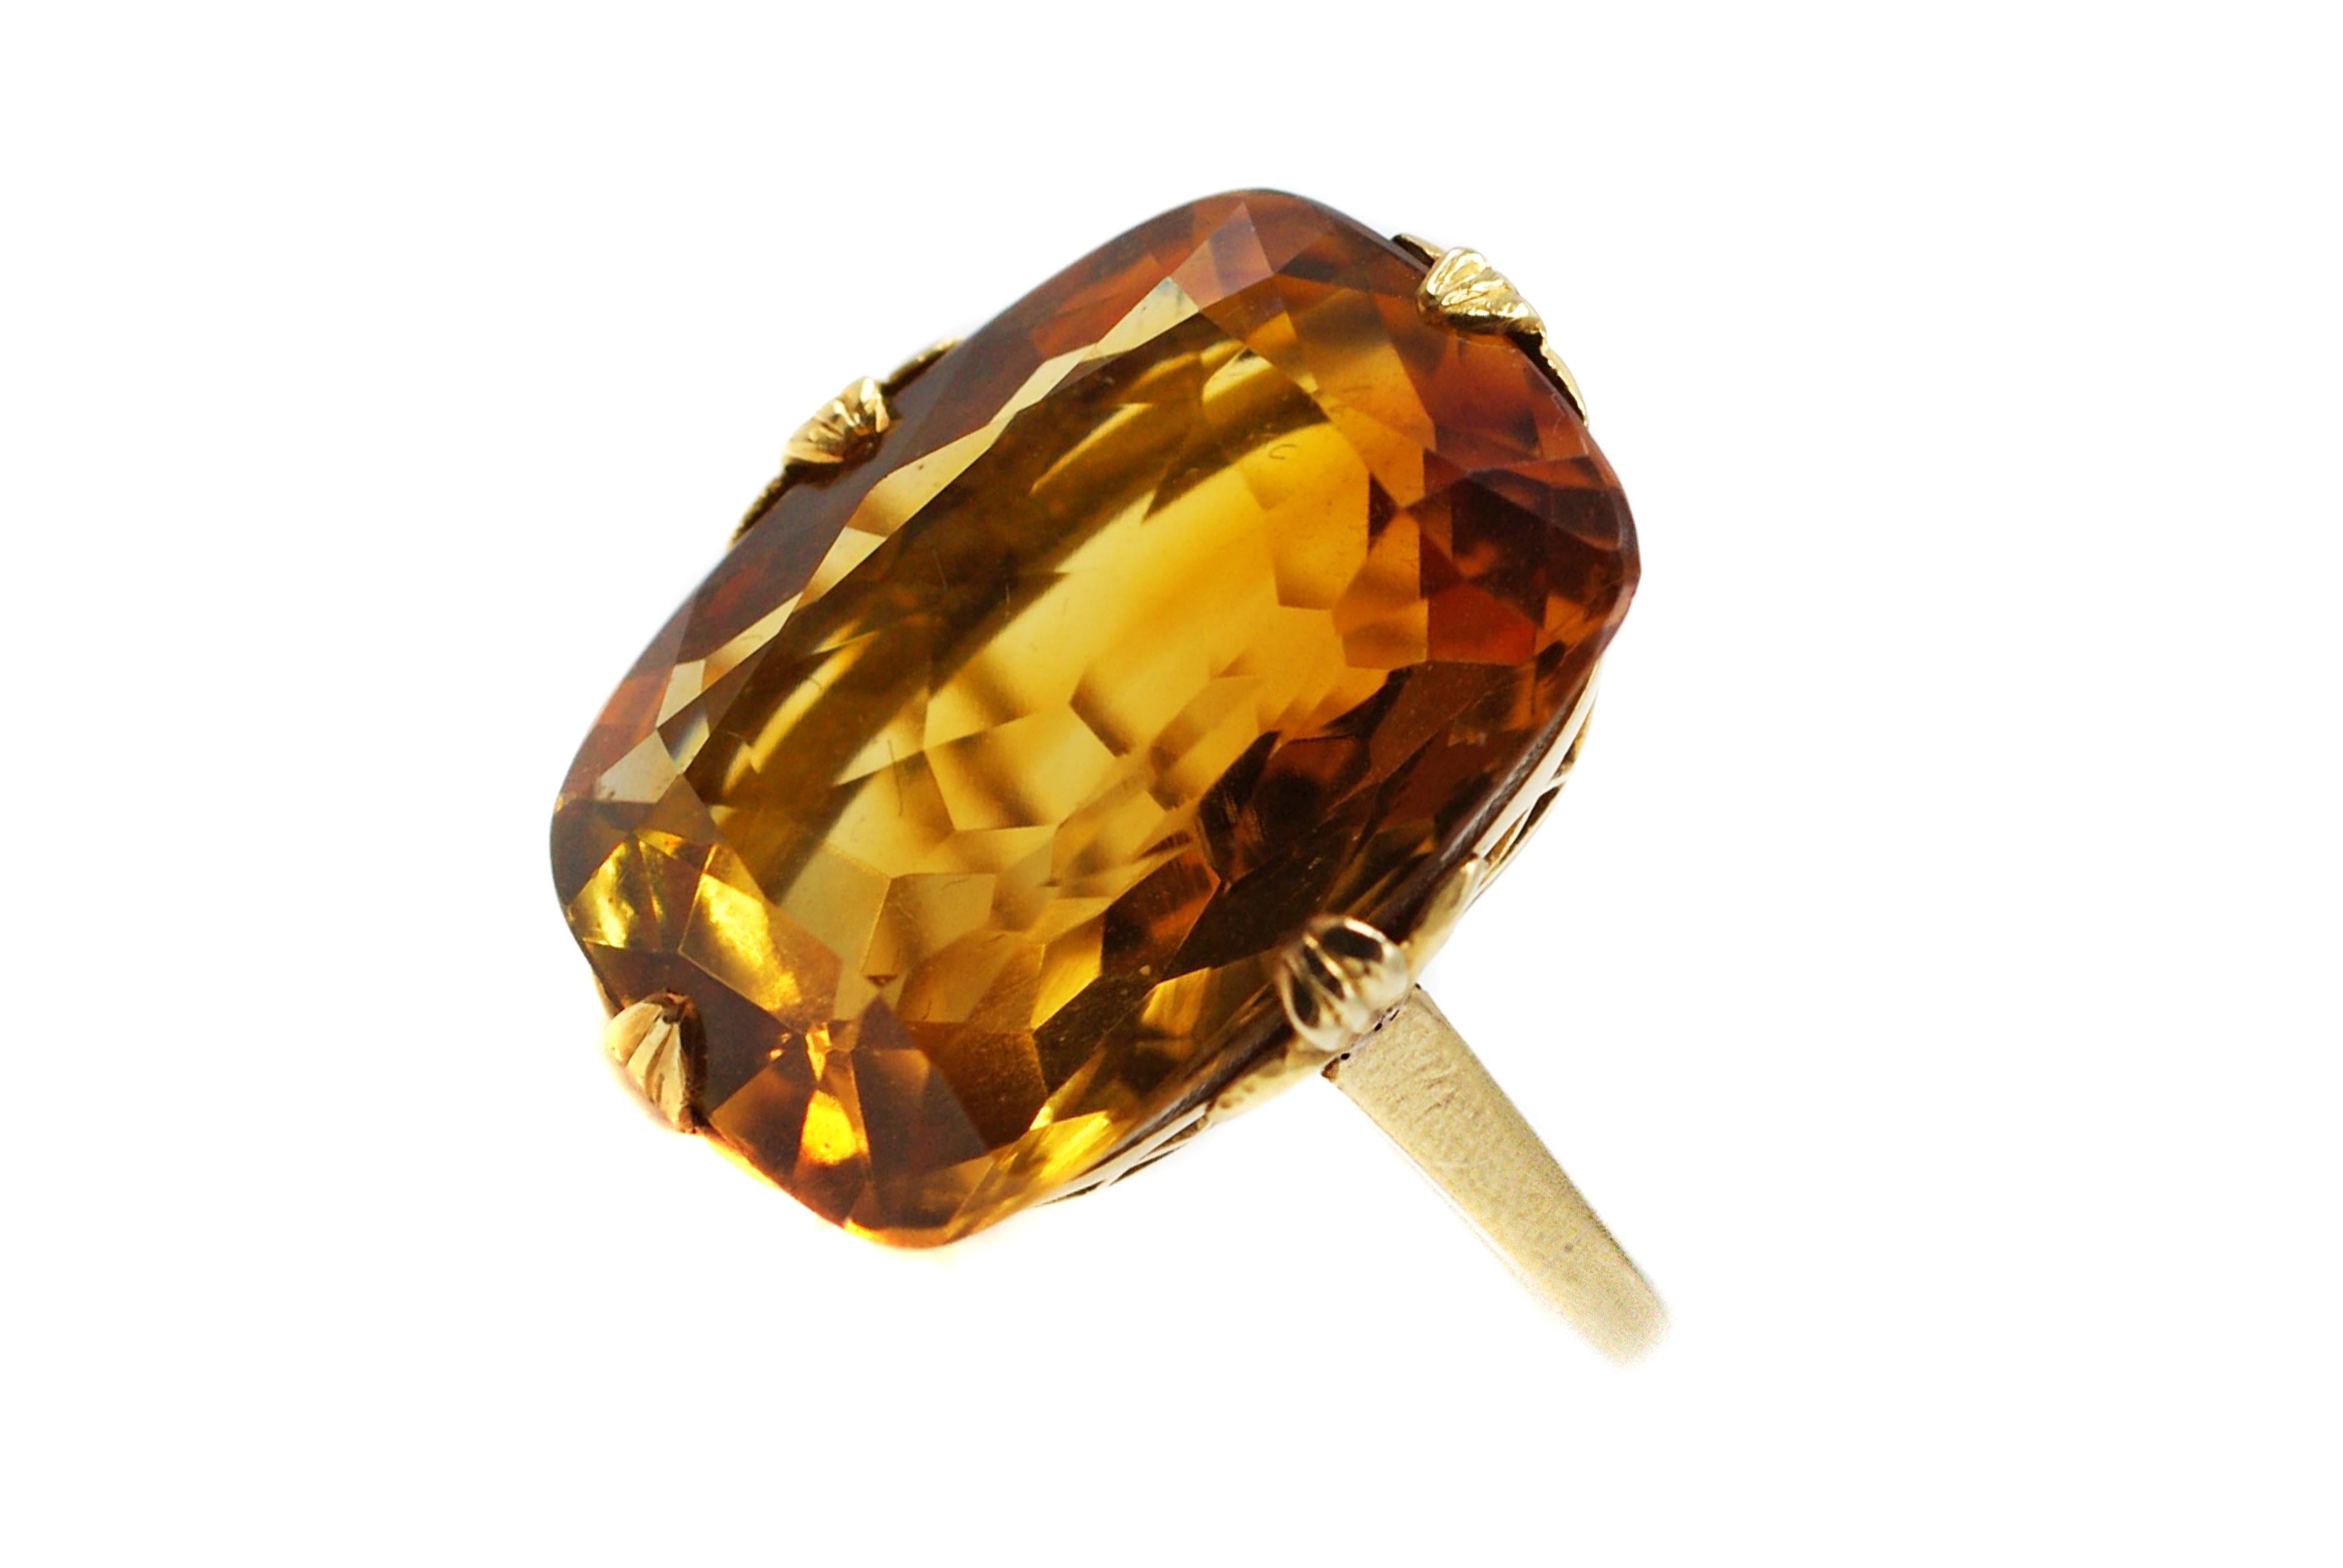 This gorgeous Tiffany & Co. Art Deco ring from ca. 1925 cradles a golden faceted Citrine measured to weigh approximately 16 carats. The perfect elongated cushion shape and impeccable faceting gives this gemstone and amazing brilliance and fire. A